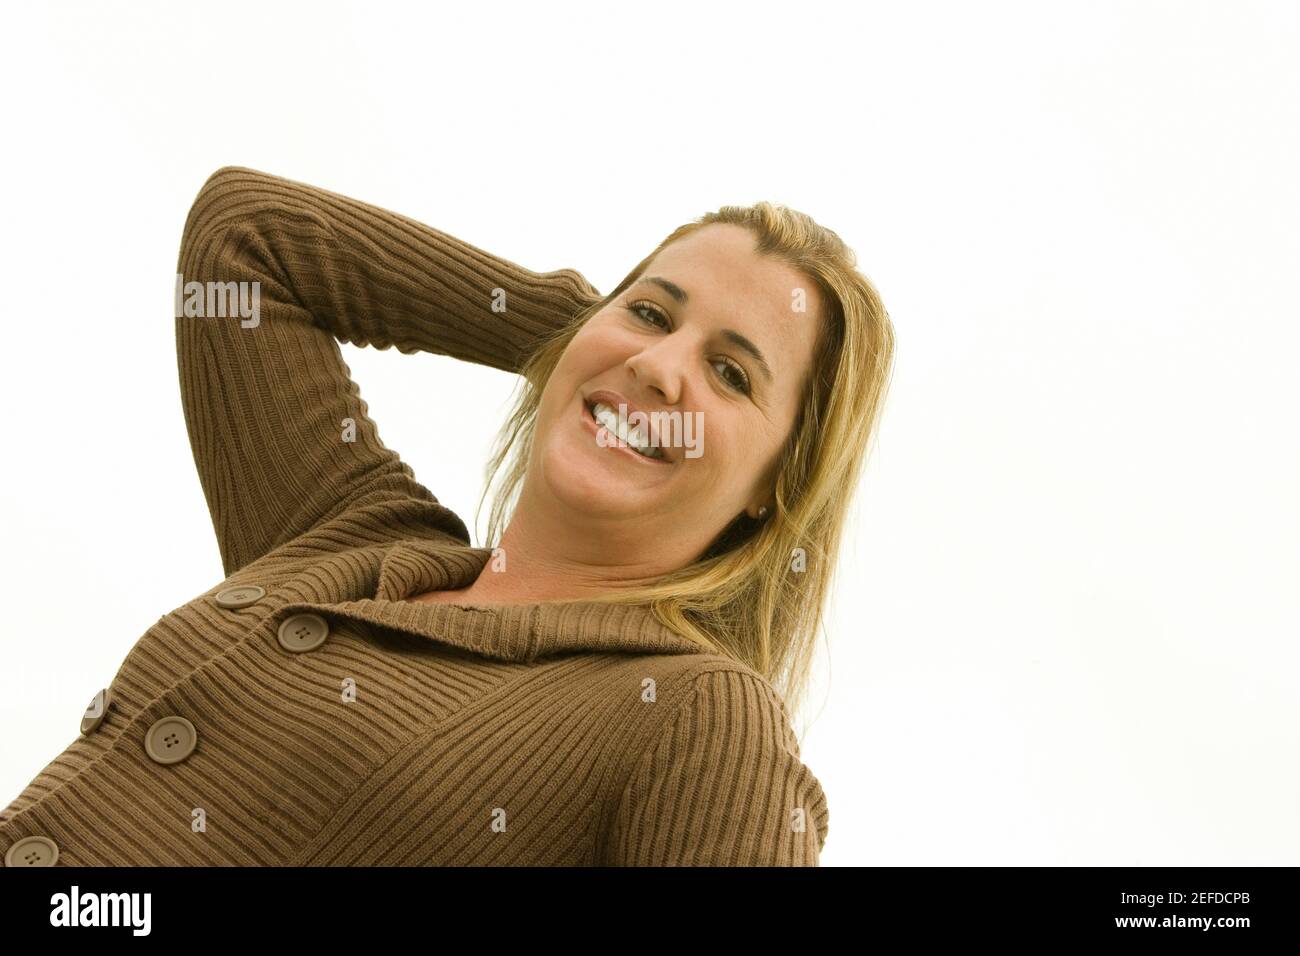 Portrait of a mid adult woman smiling with her hand in her hair Stock Photo